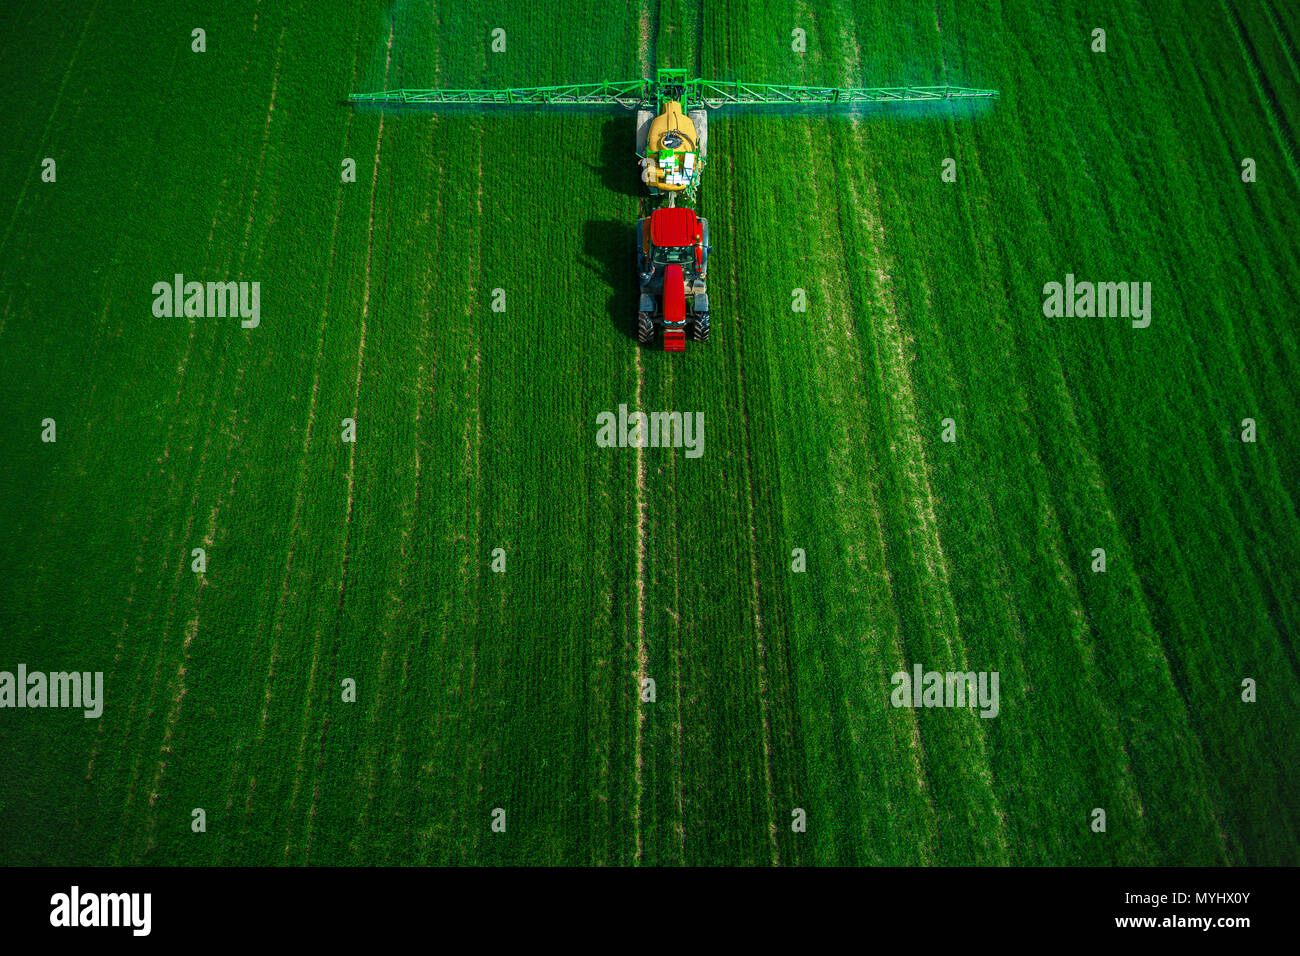 Aerial view of farming tractor plowing and spraying on field. Stock Photo